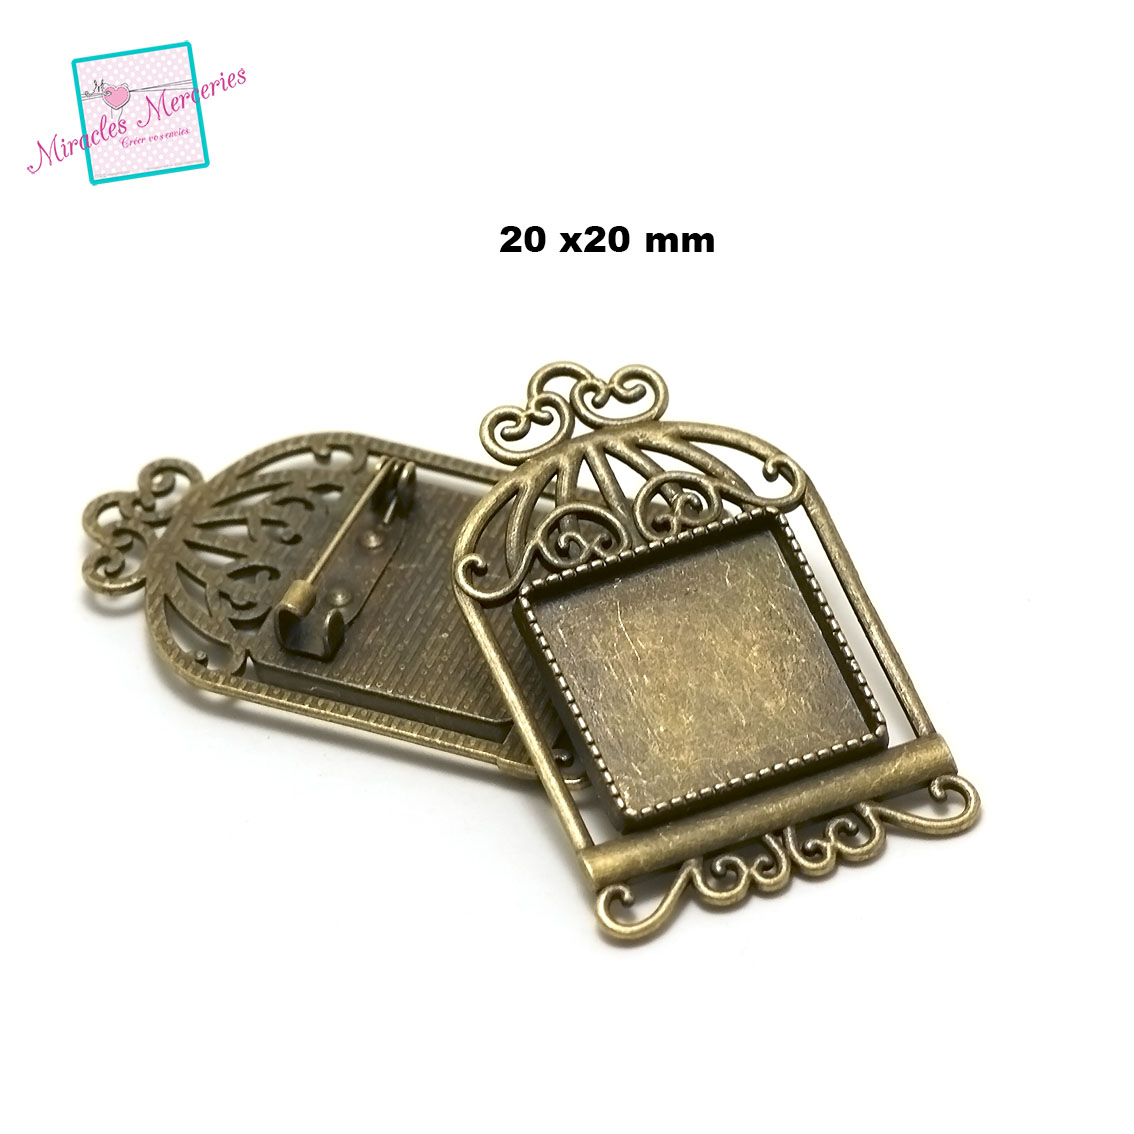 1 broches support cabochon 005 carrée 20x20 mm,bronze